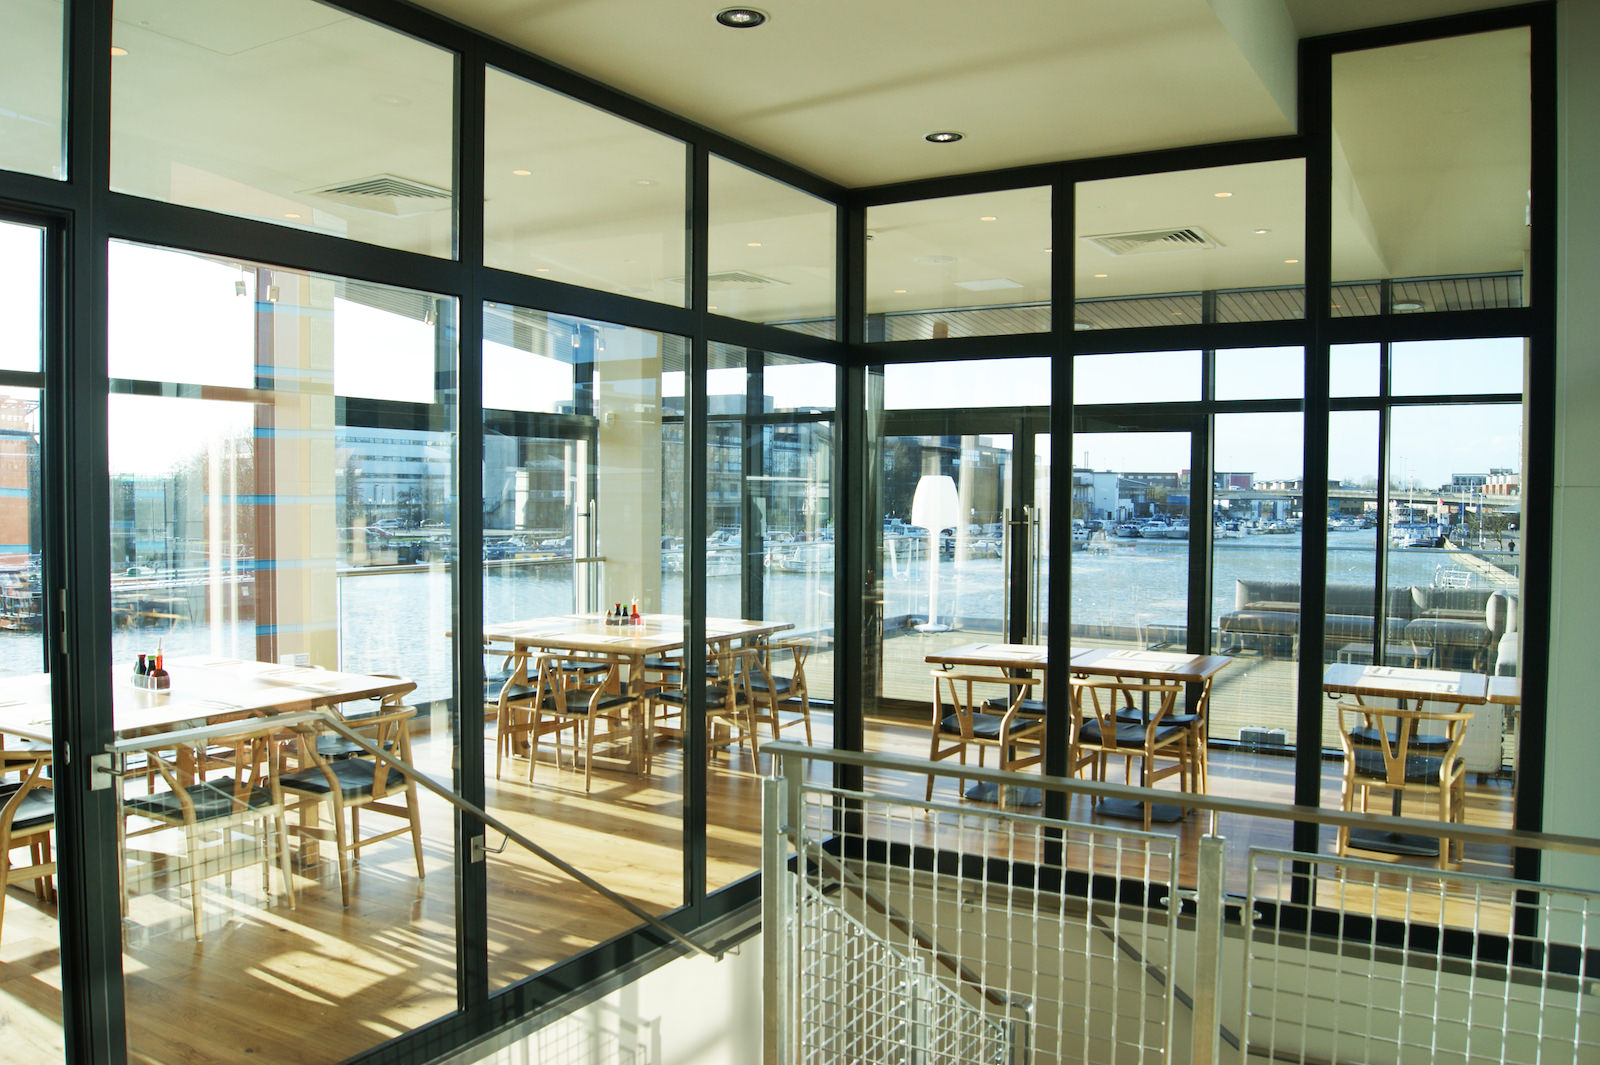 amazing view of the modern interior design of the Harbourmasters wagamama building